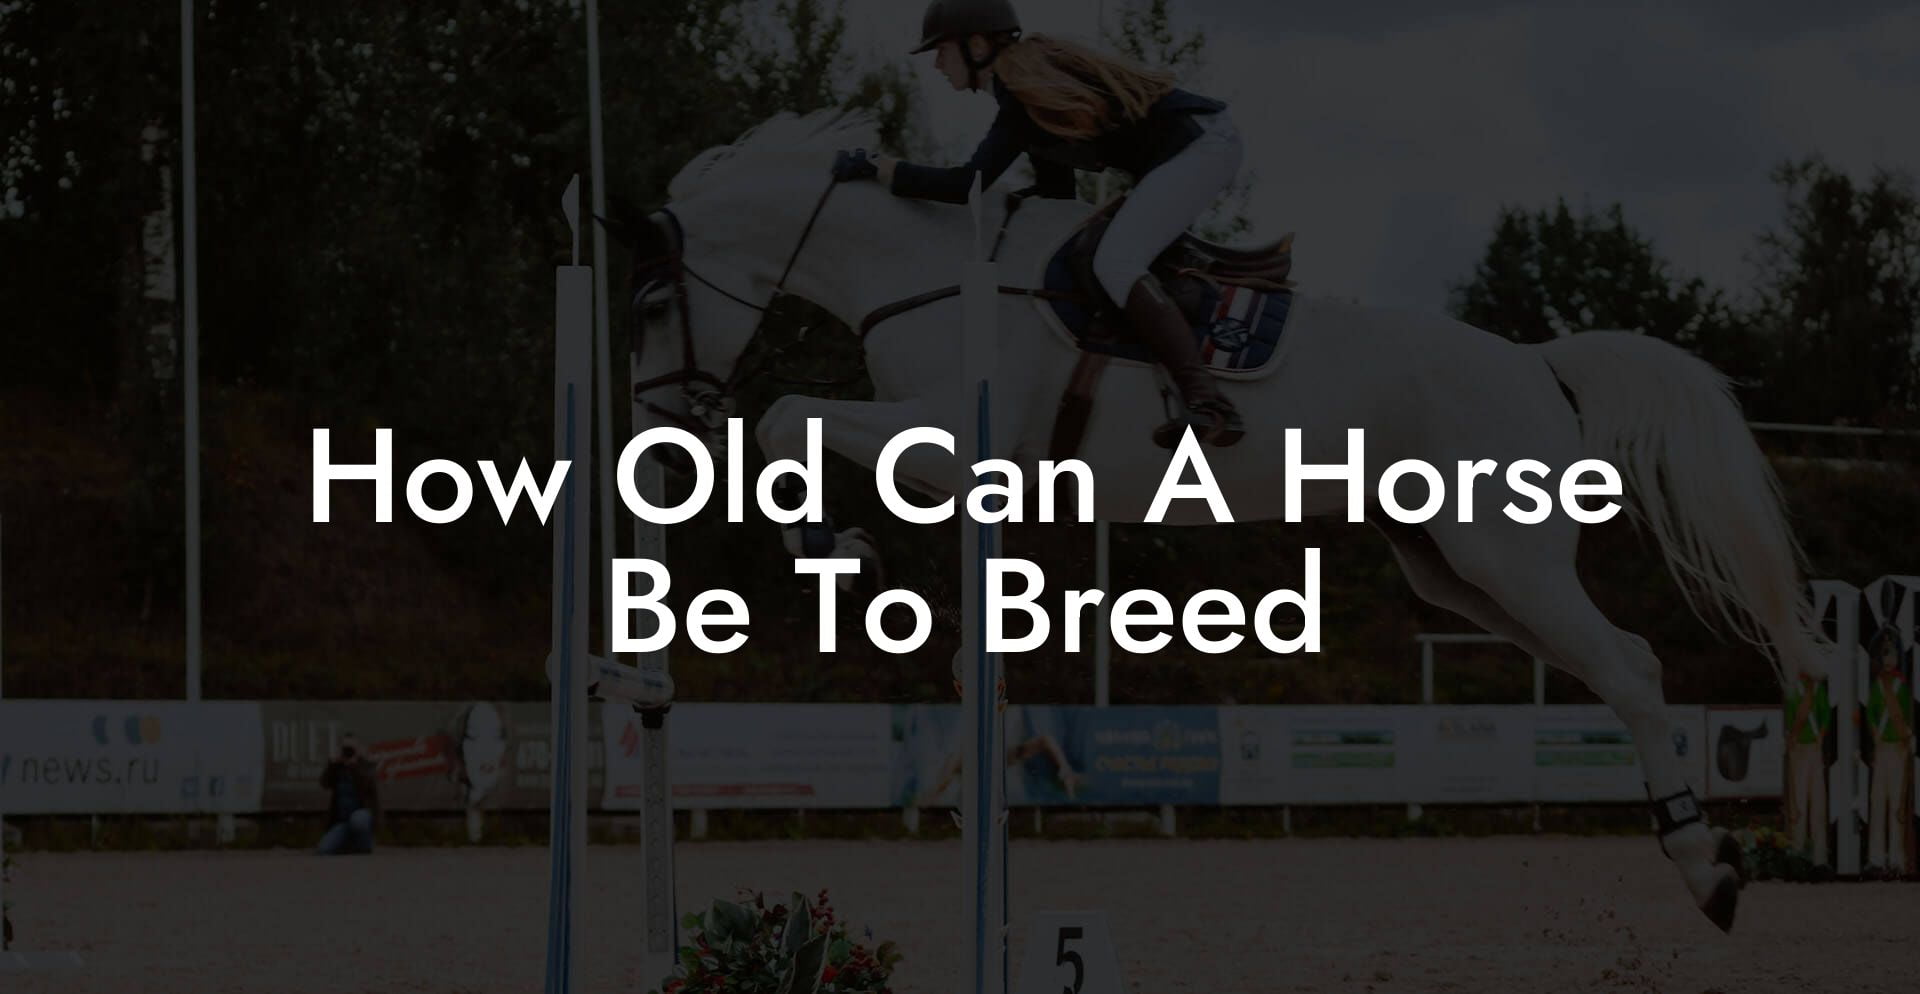 How Old Can A Horse Be To Breed